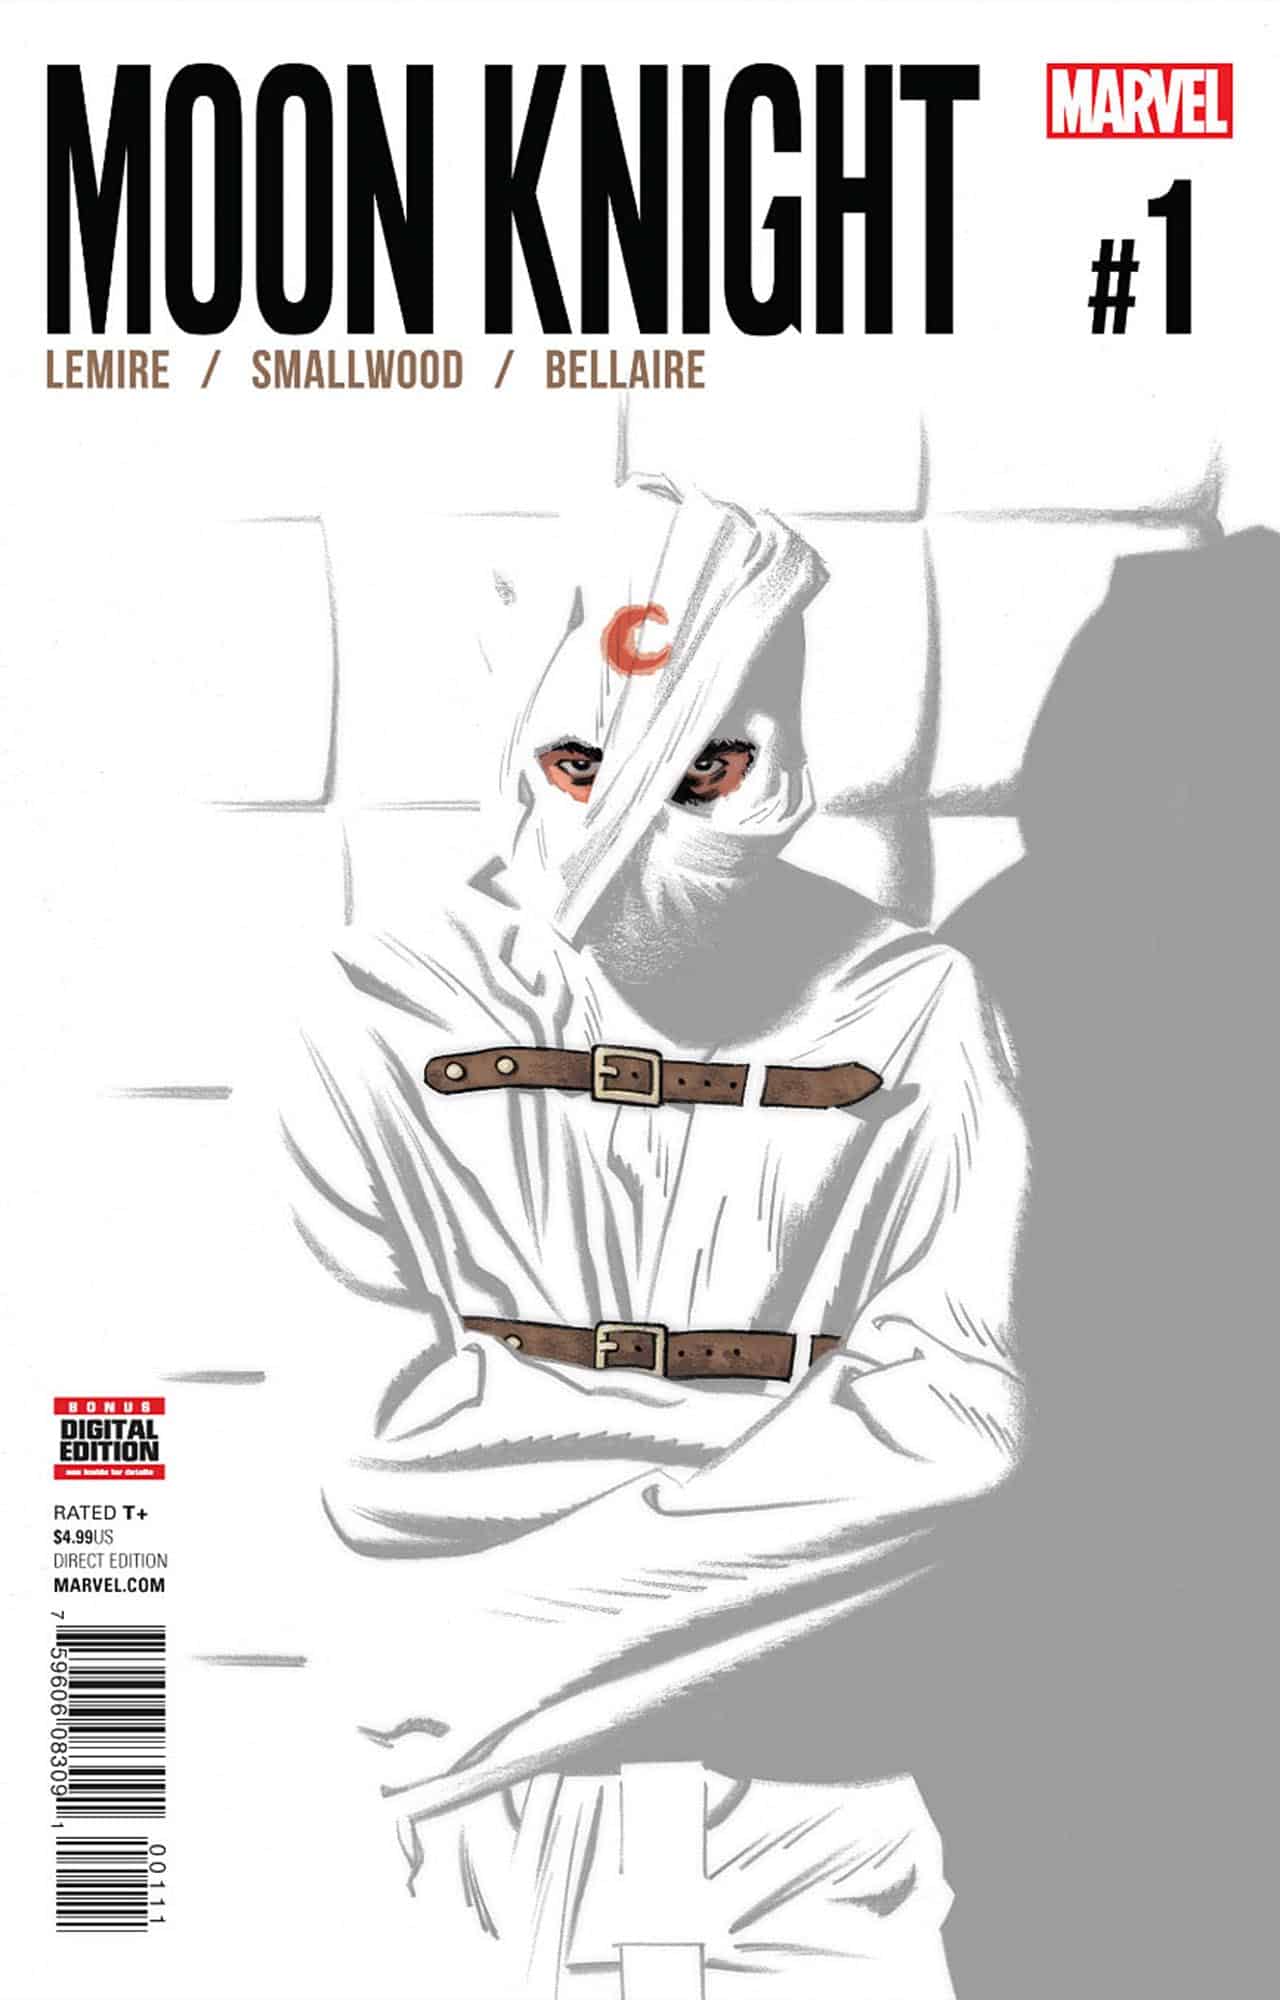 Three Comics To Read Before Watching Moon Knight